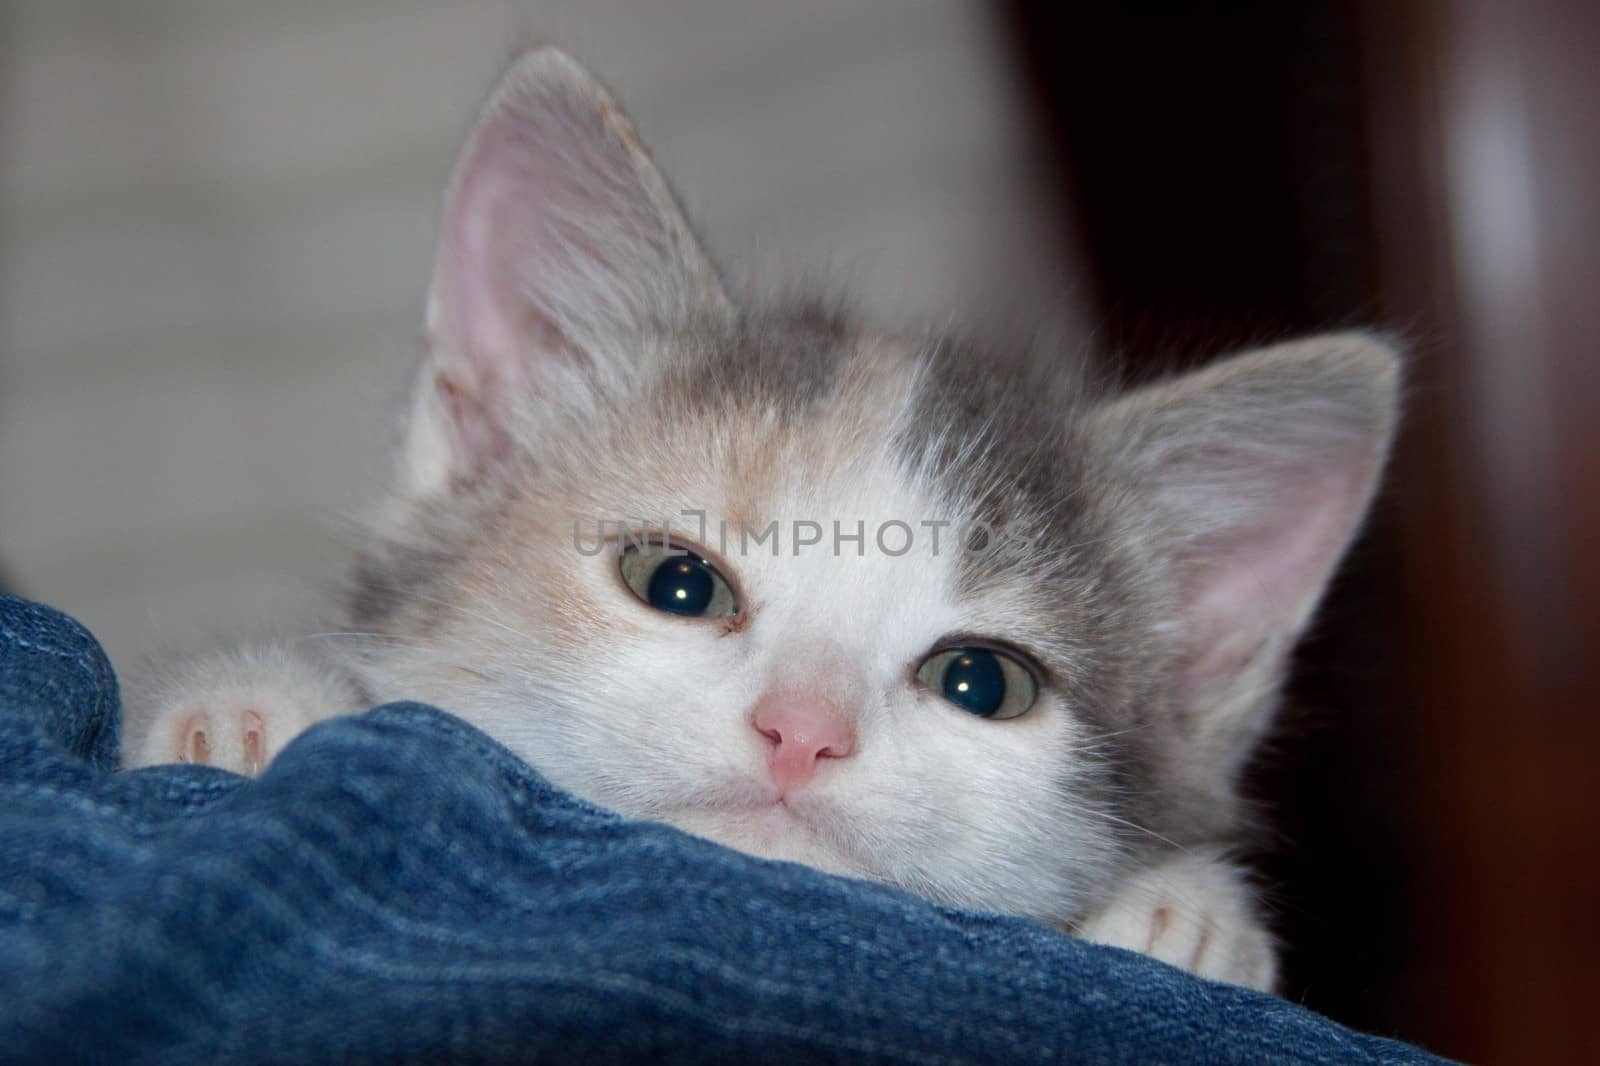 A kitten peering over something looking curious.